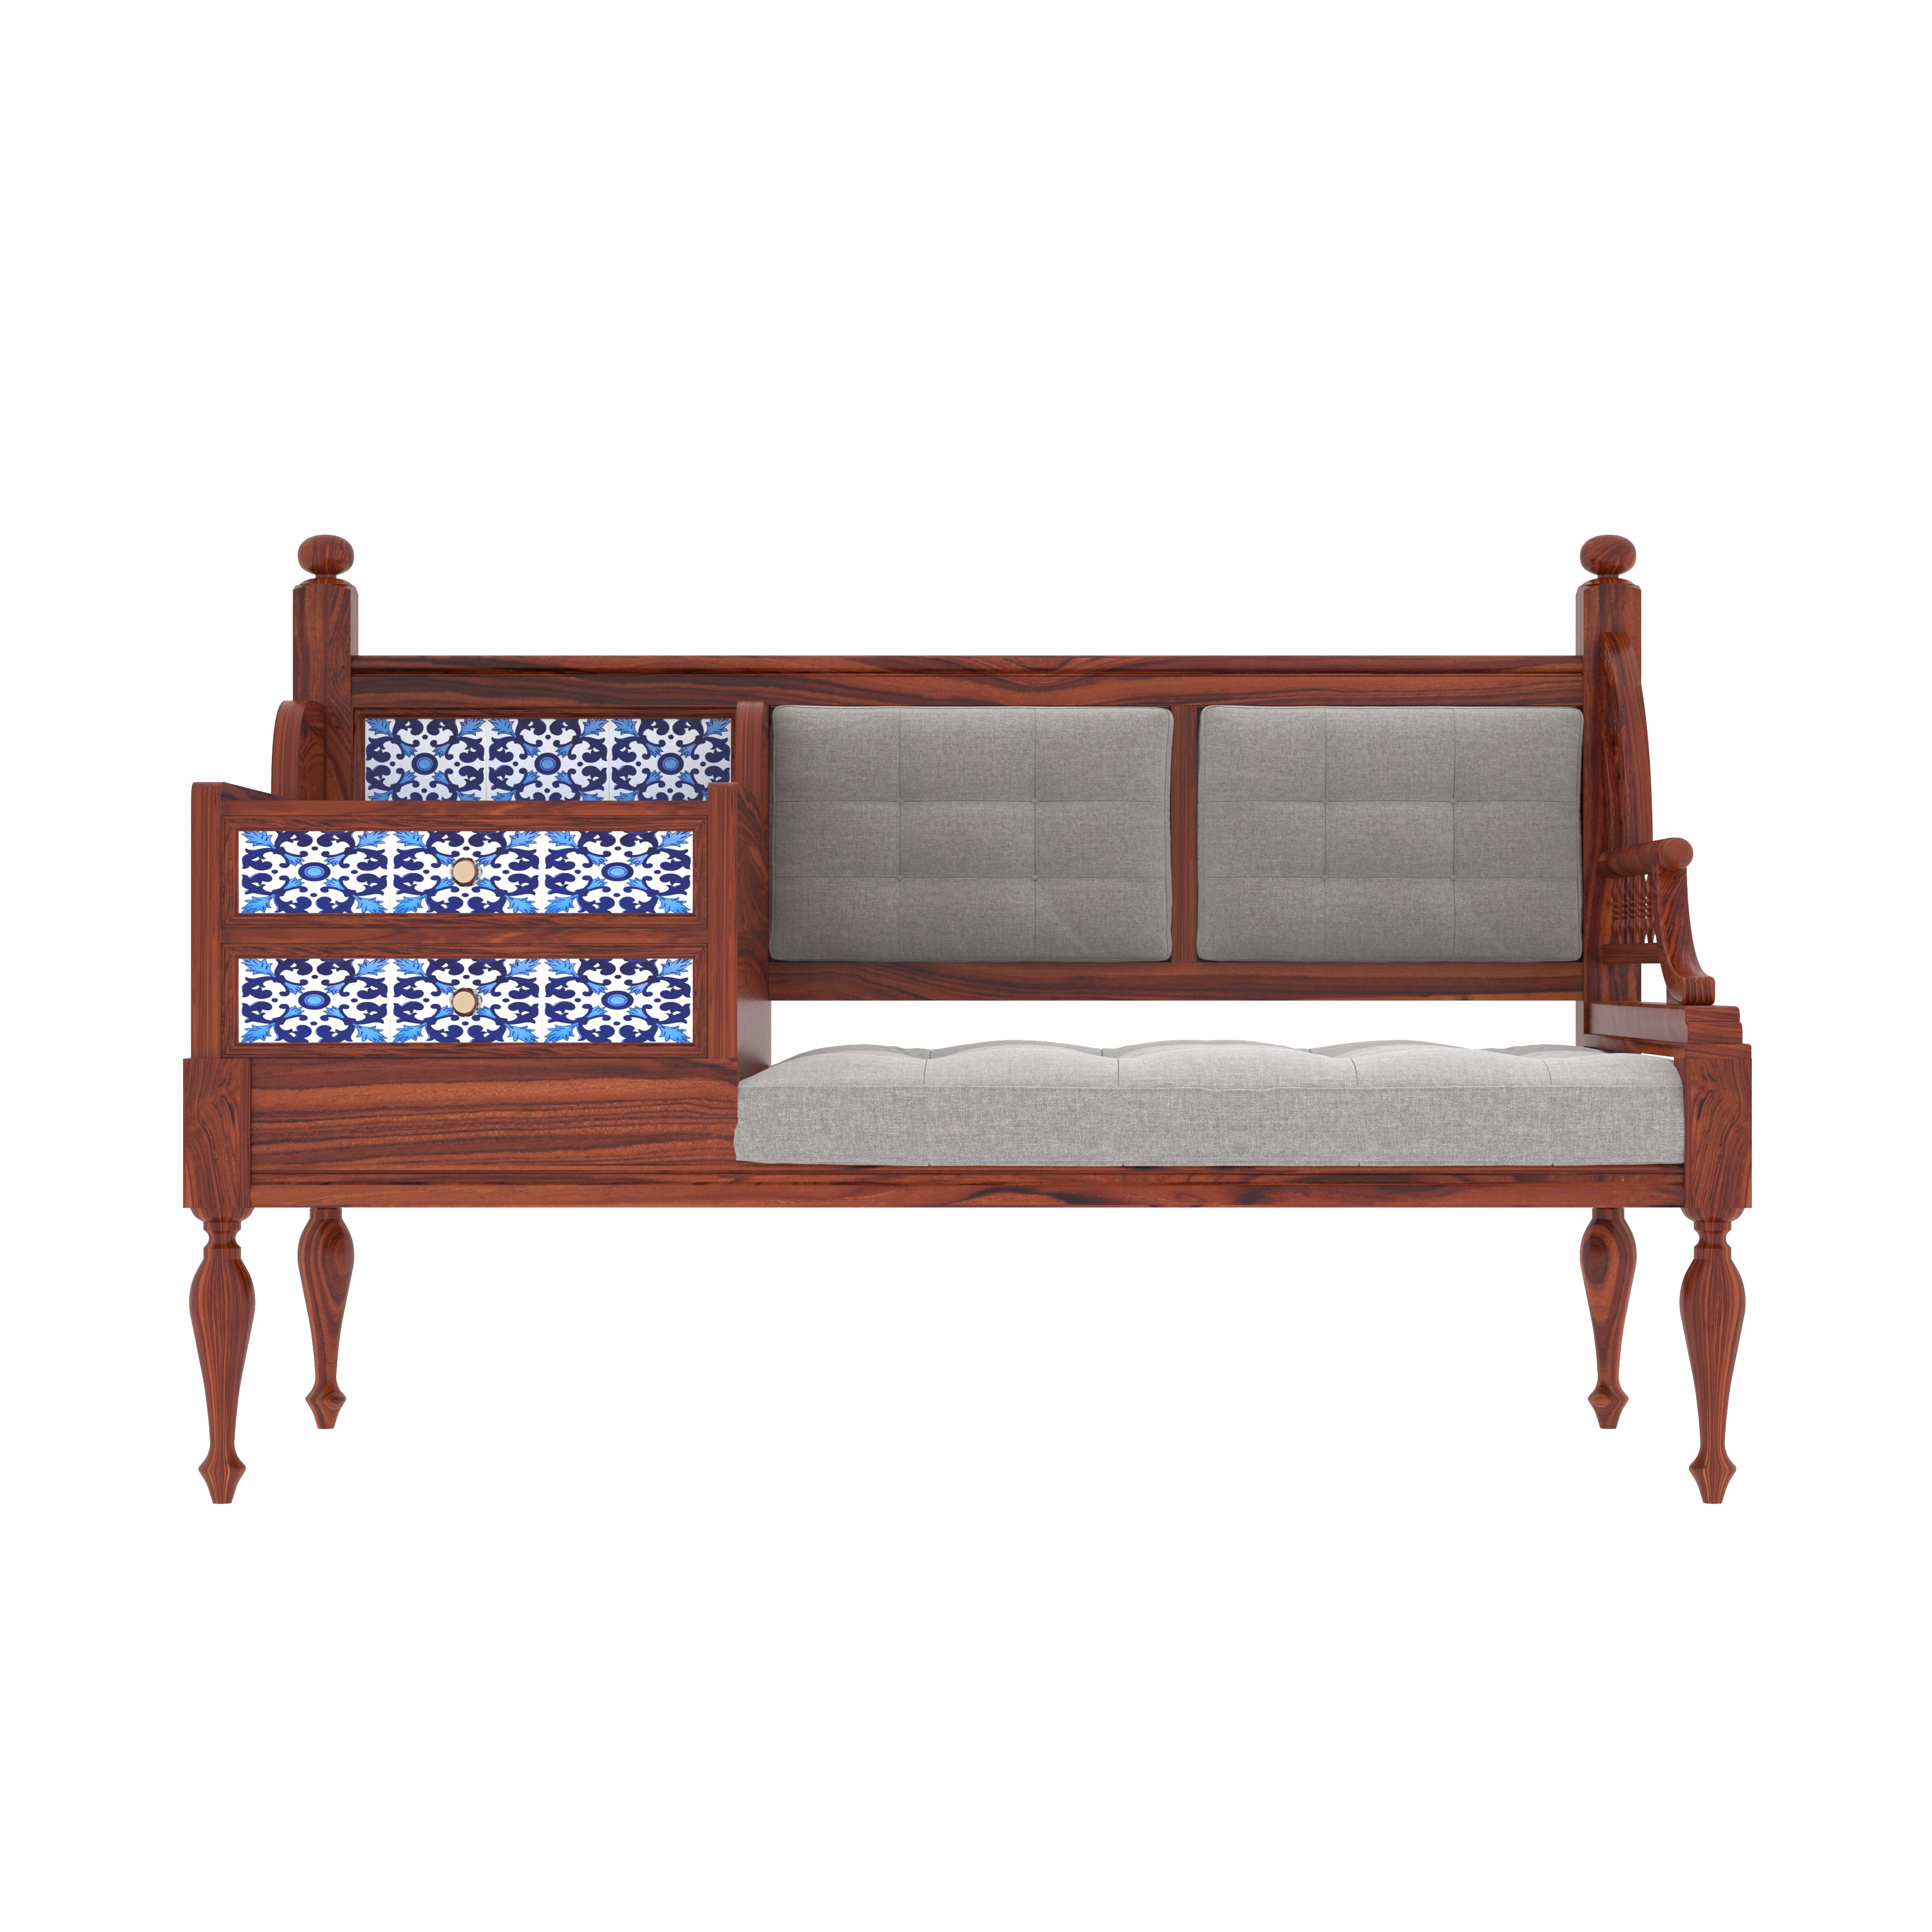 Southern East Light Finished Handmade Wooden Sofa With Duel Storage Drawers Sofa